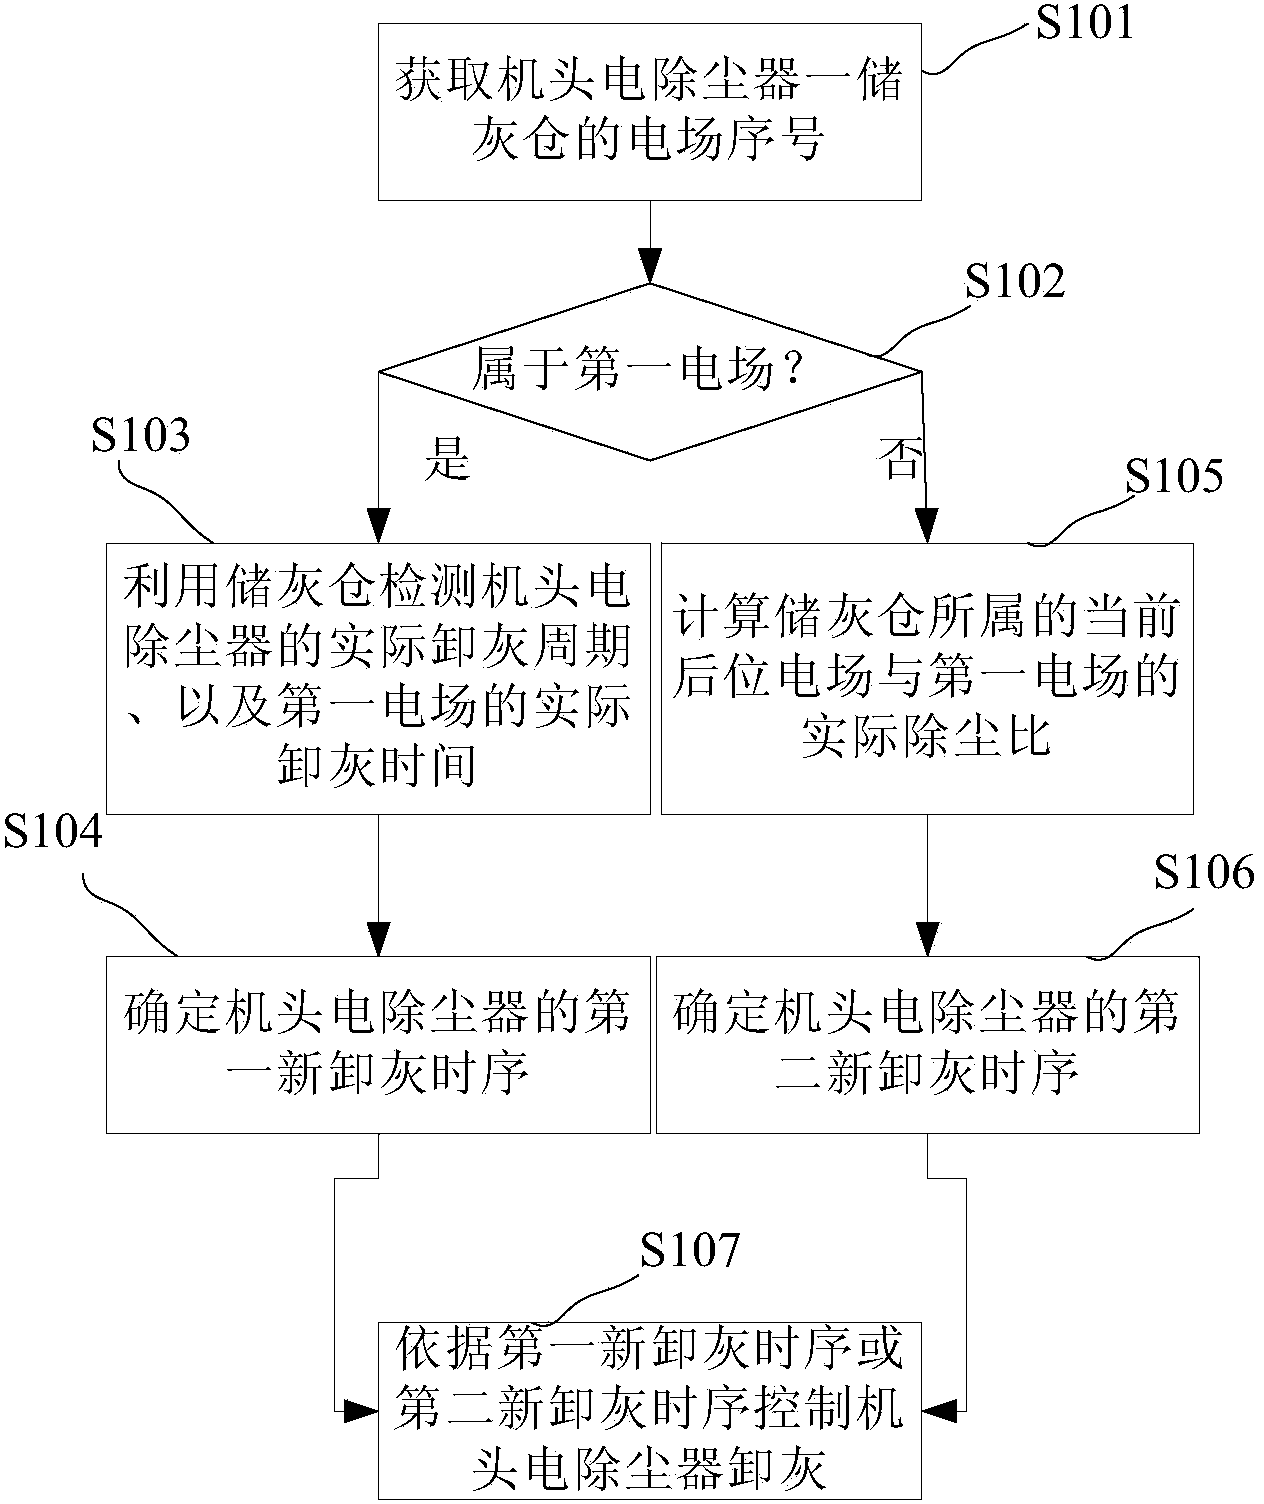 Discharging control method and system for nose electrical precipitator for reducing air leakage rate of sintering system